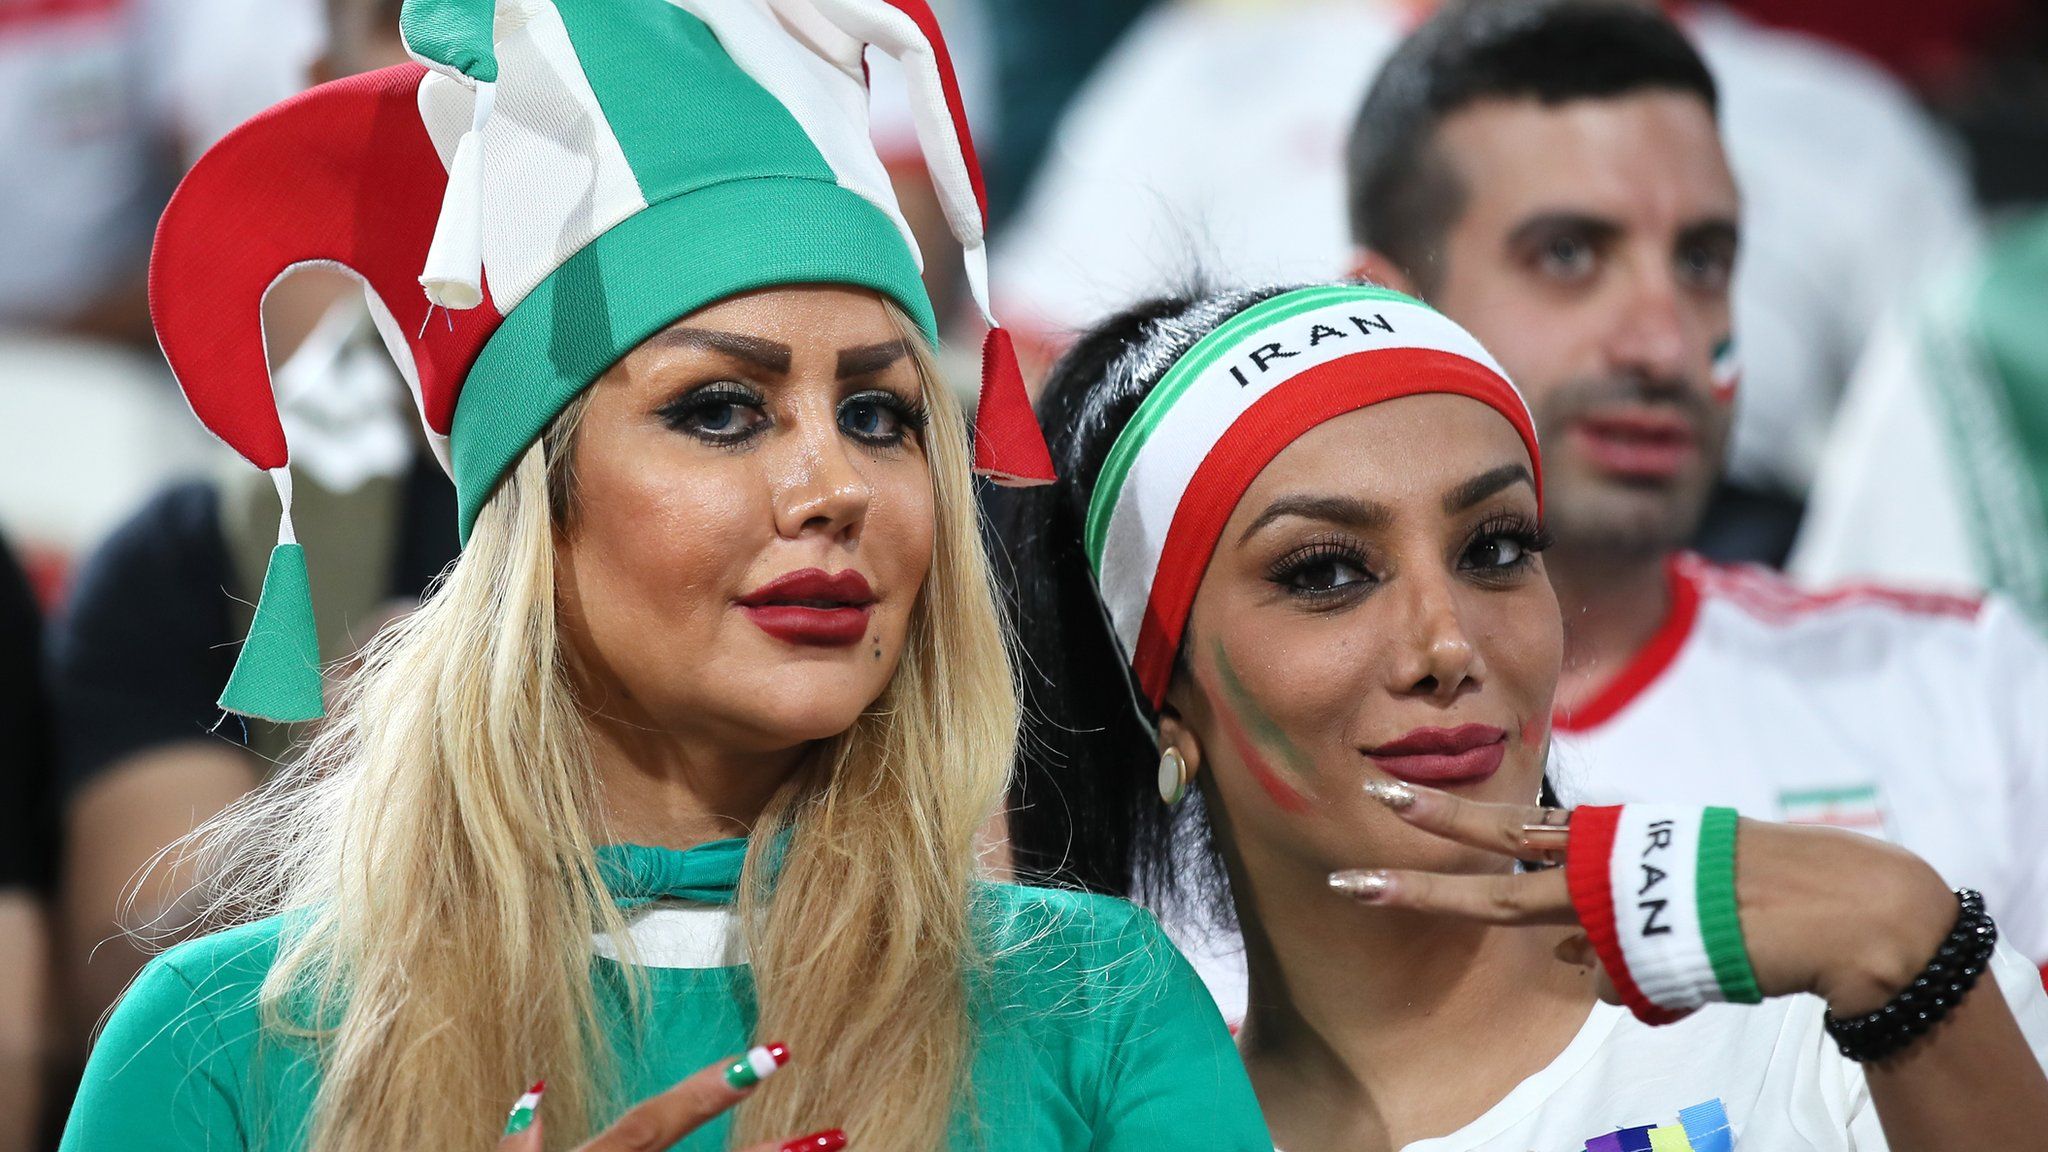 Female Iranian football fans attend a an AFC Asian Cup quarter-final between China and Iran in January 2019 in Abu Dhabi